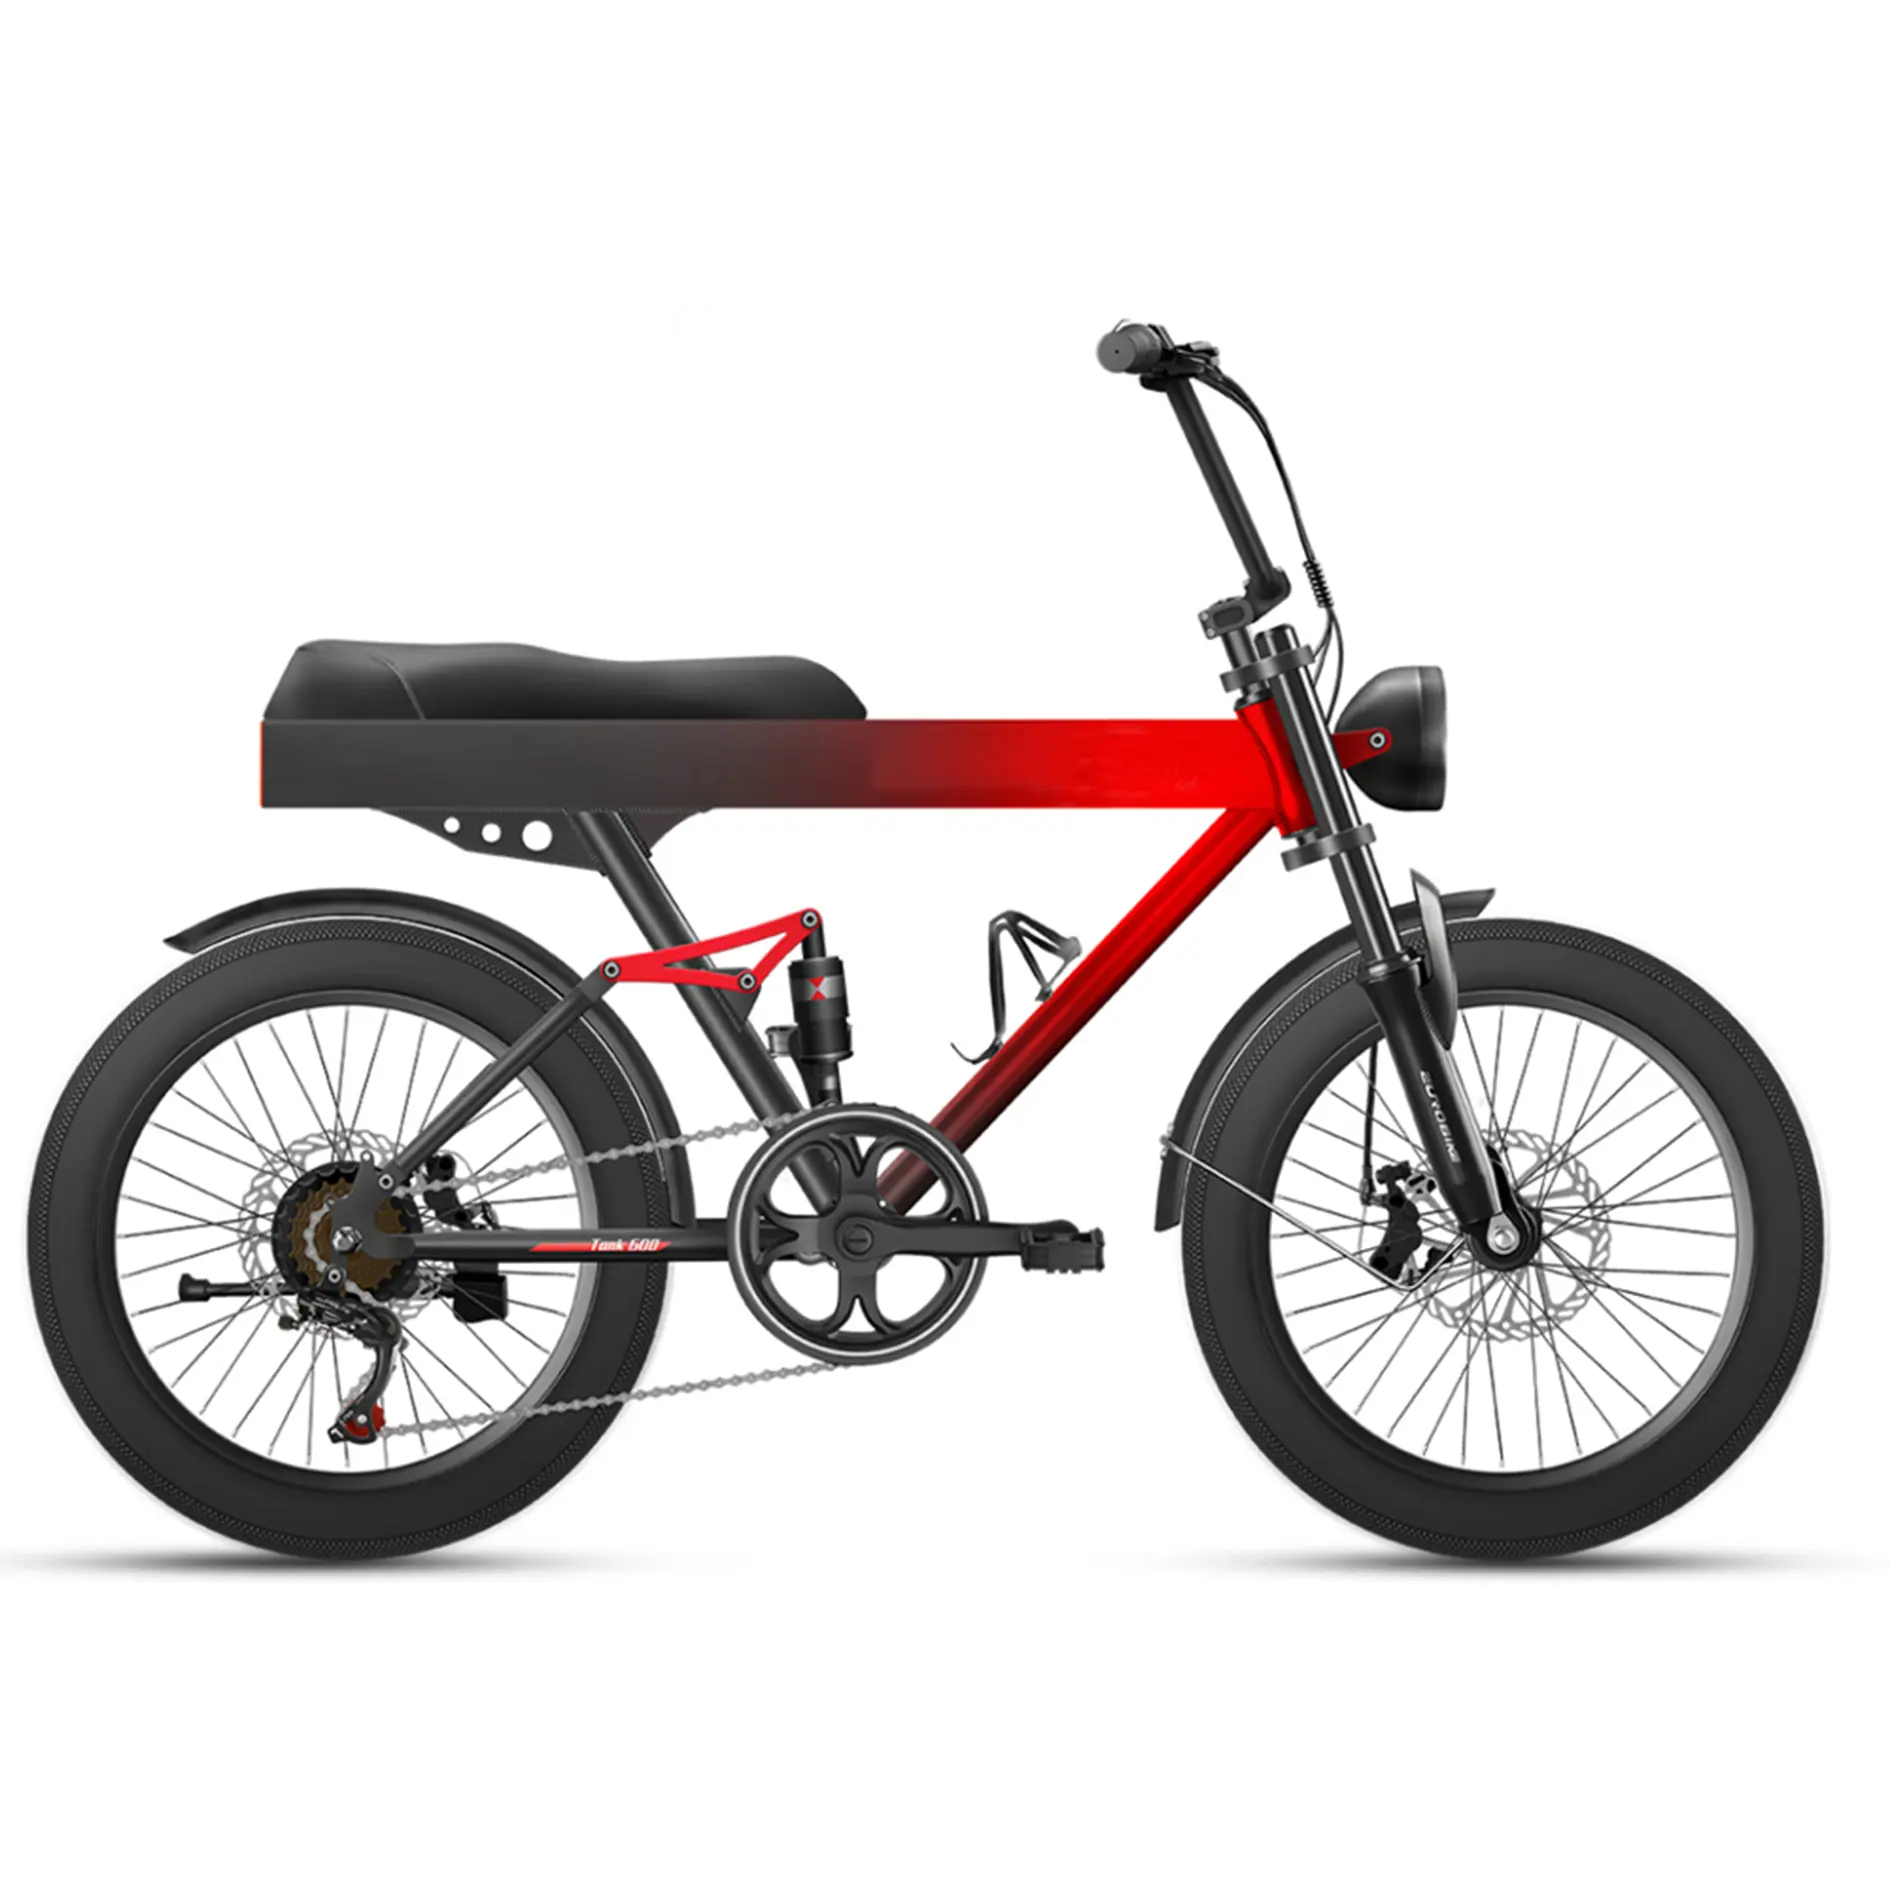 2021 new design hot sale 20 inch fashion 48v 500w high quality fat tire electric mountain made in China